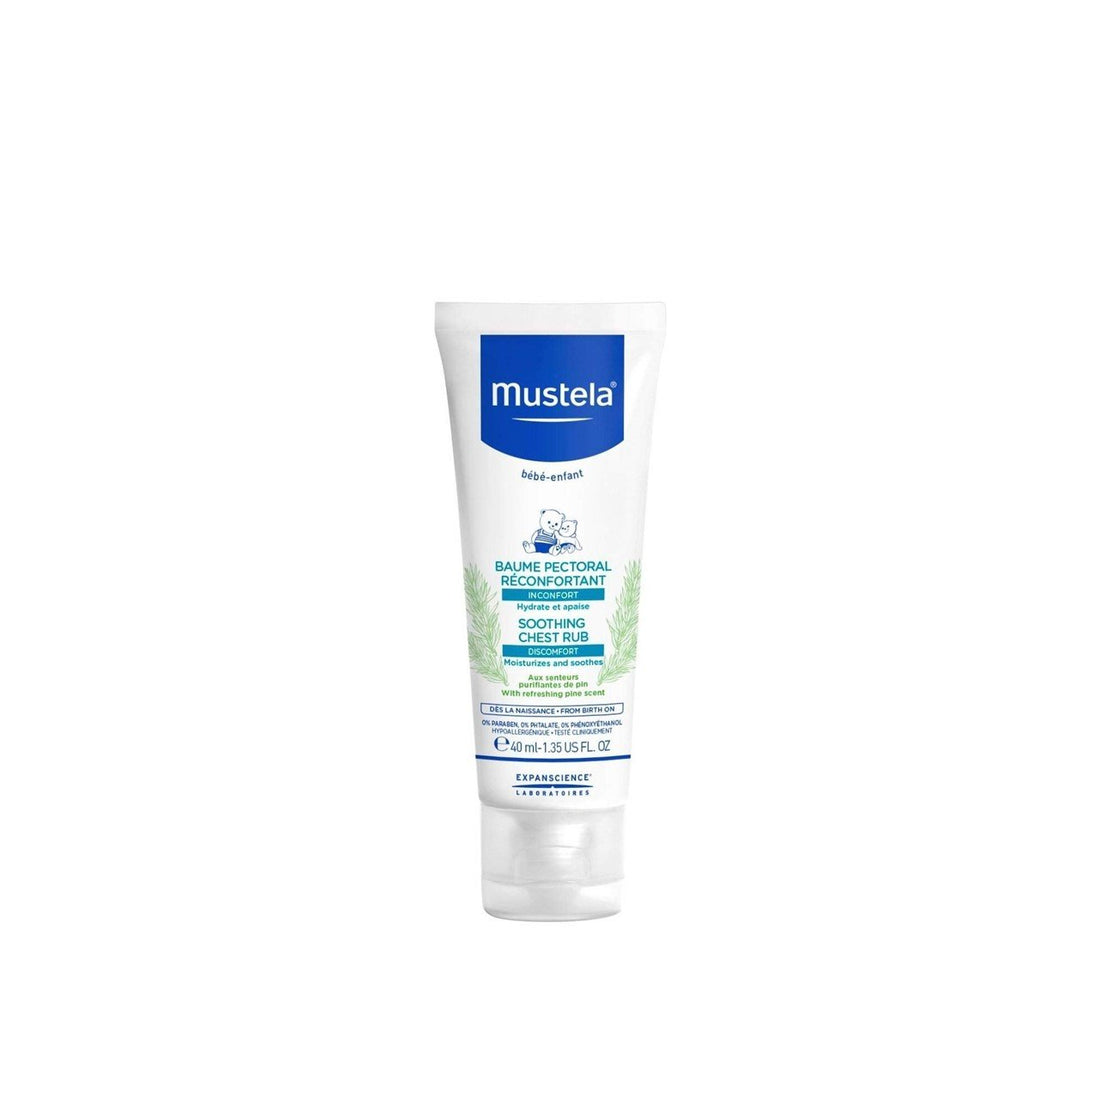 Mustela Soothing Chest Cream 40ml